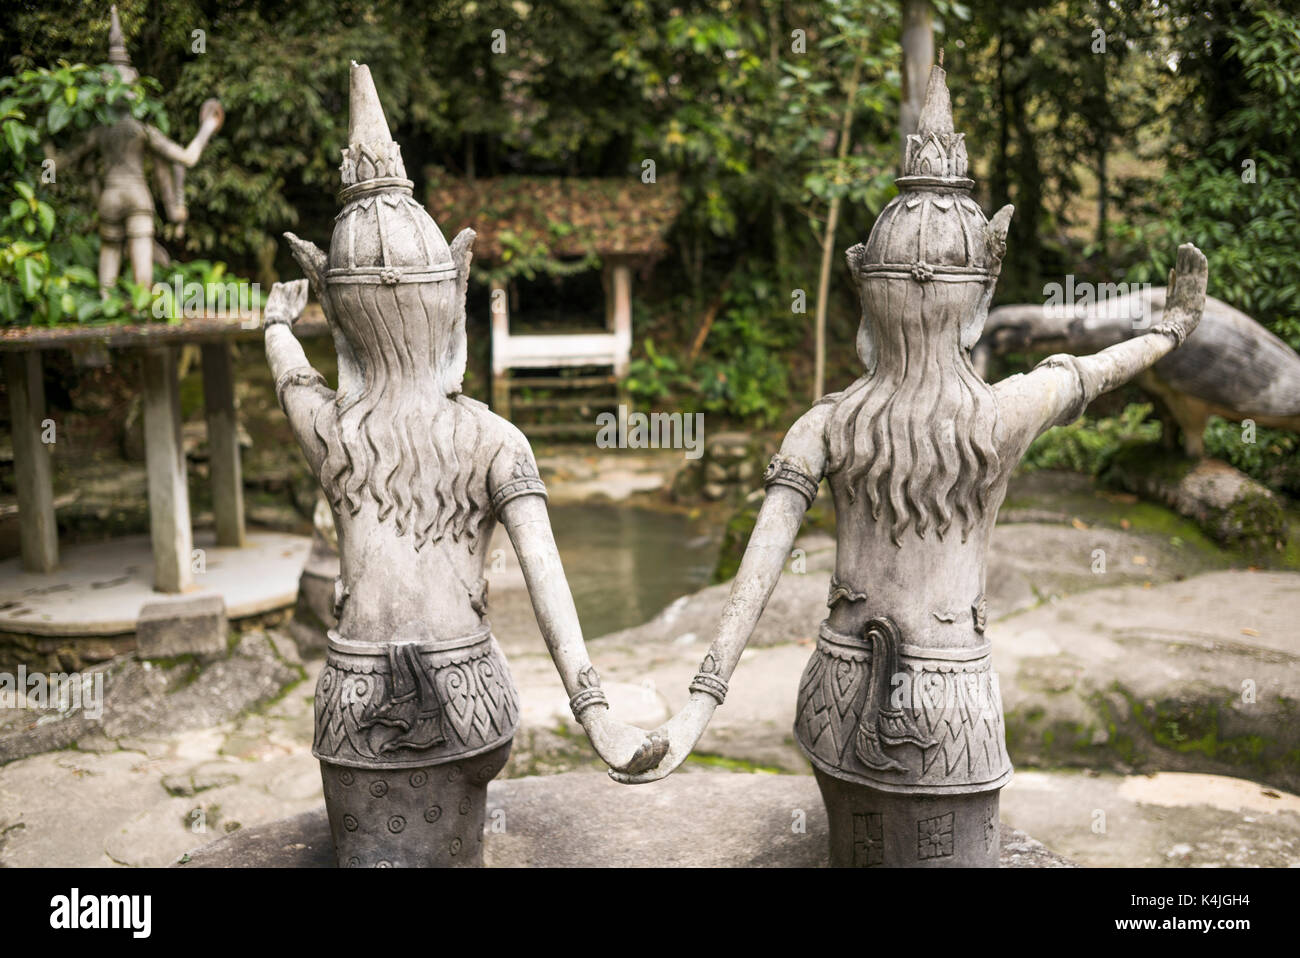 Rear view of two statues in Heaven's Garden, Koh Samui, Surat Thani Province, Thailand Stock Photo